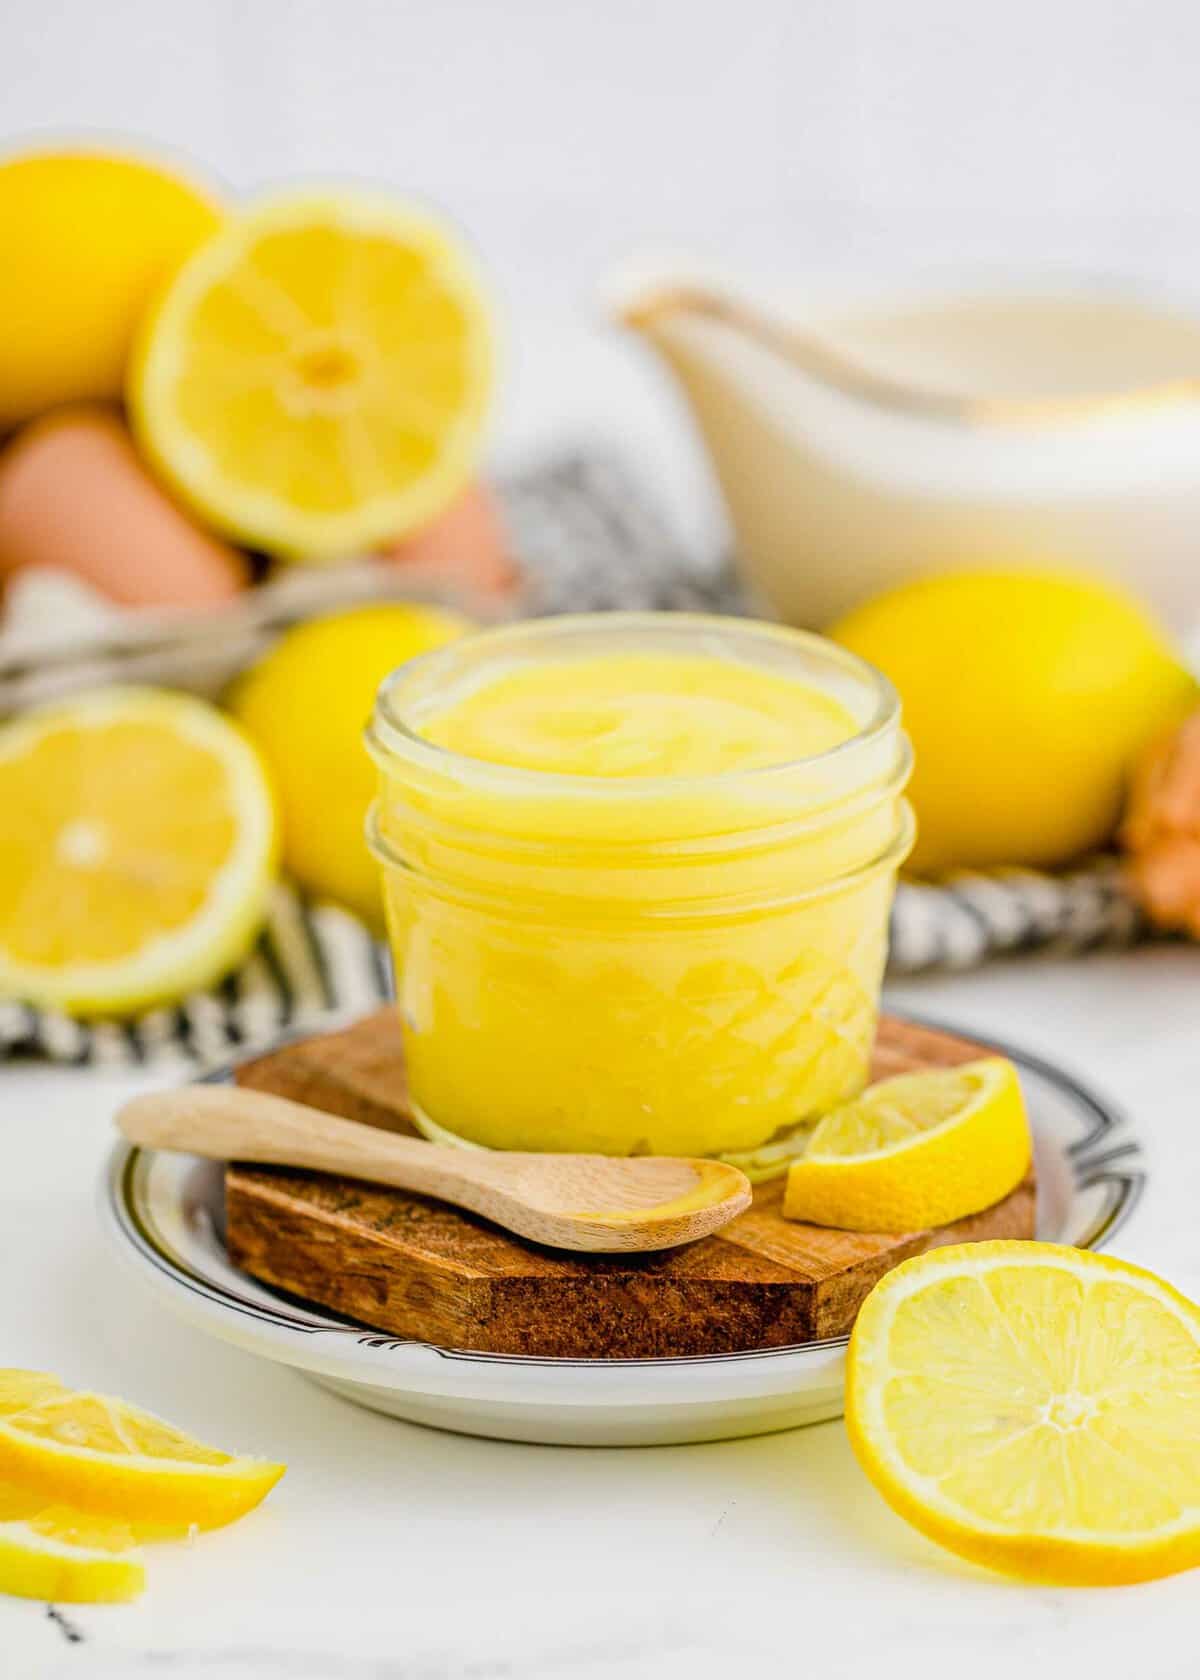 Jar of lemon curd with spoon and lemons in background